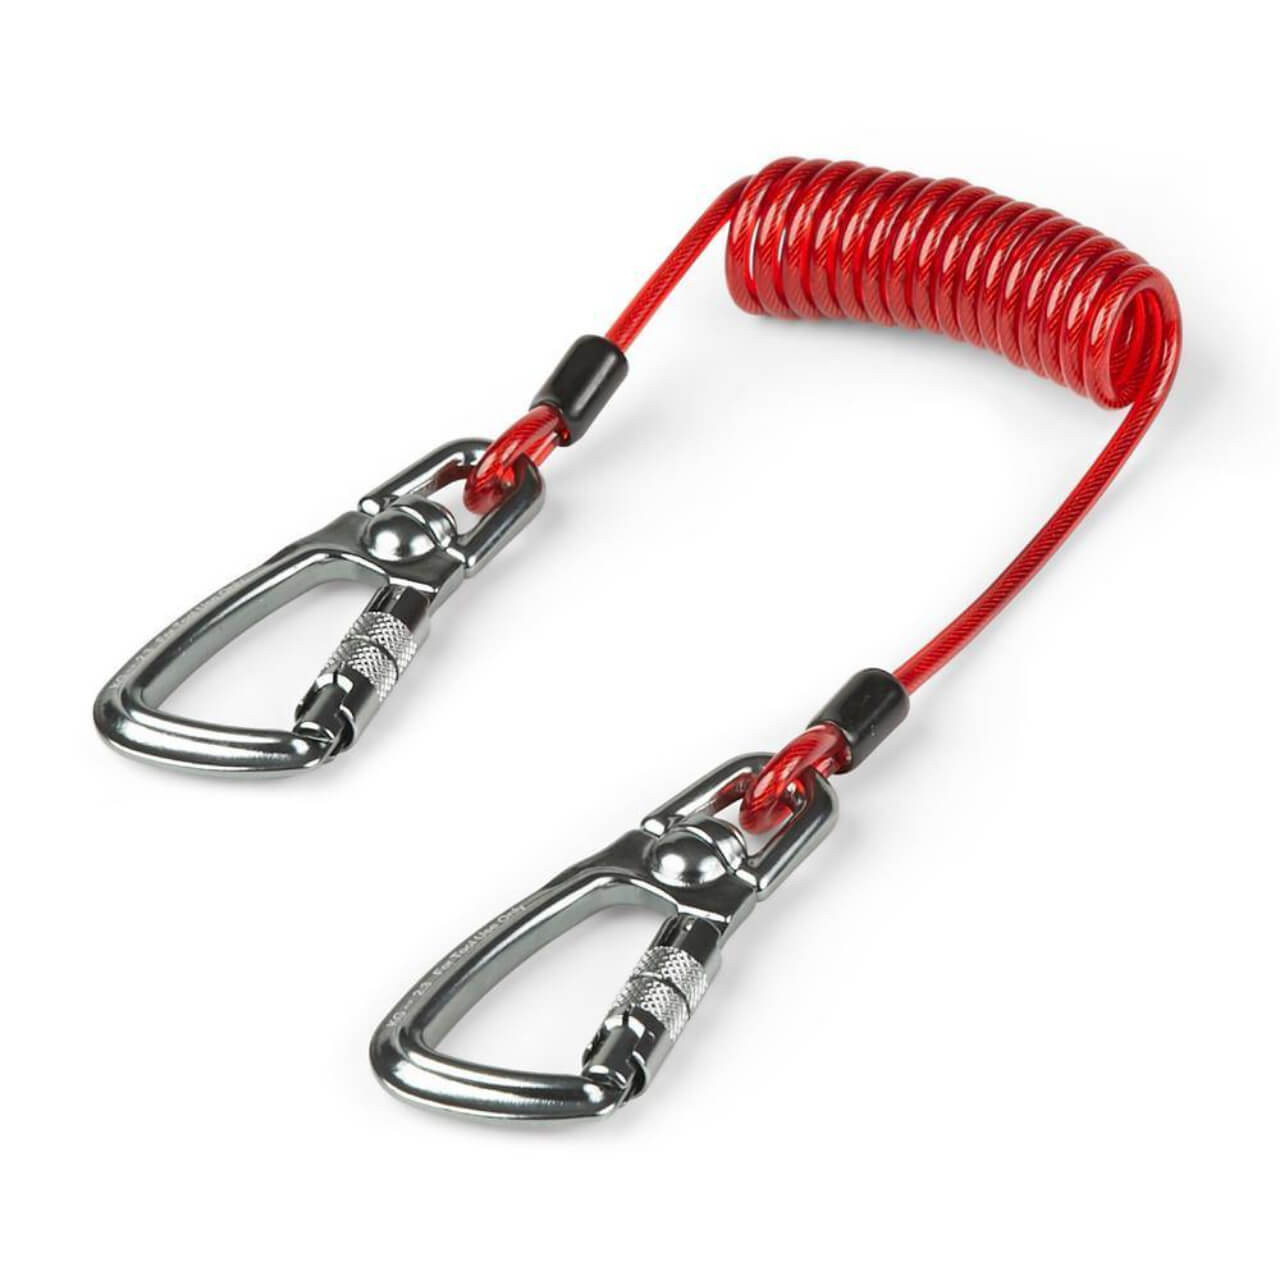 GRIPPS Coil Tether Dual-Action 2.3kg Max Load